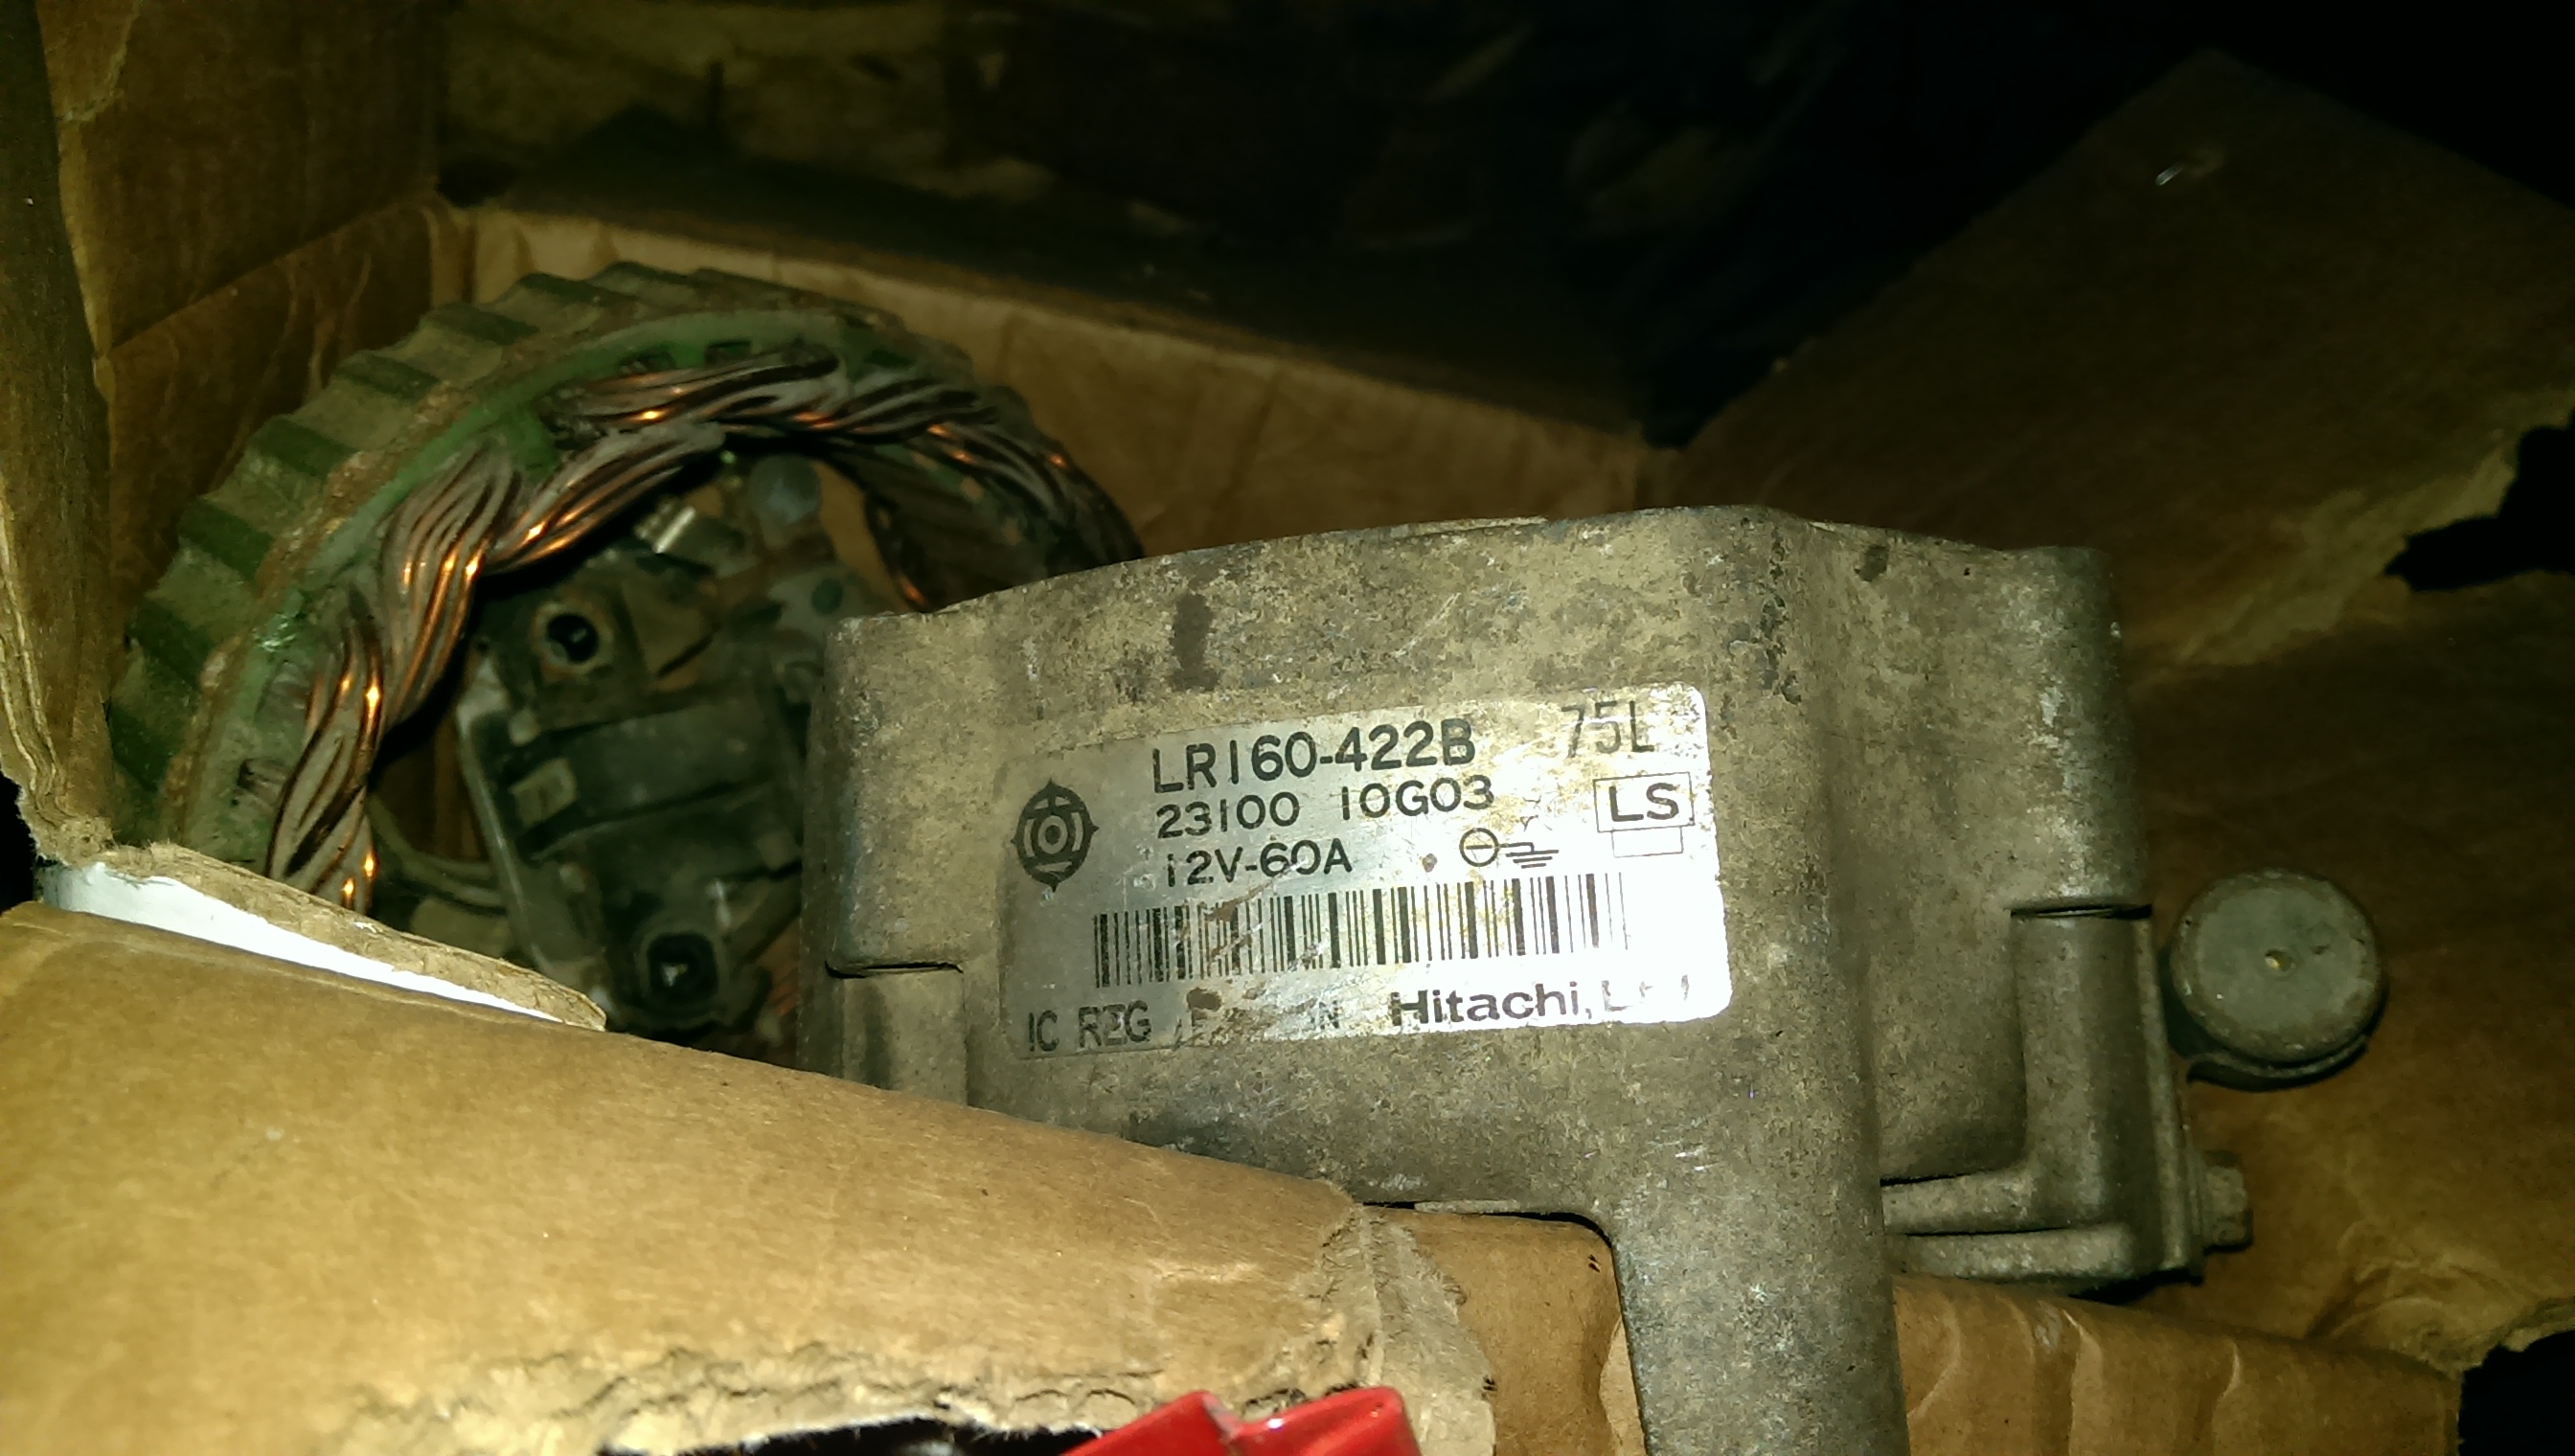 lr160-422b hitachi alternator from the sd25 VE. Some quick research says the td27 alternator was possibly 80amp or 70amp. this case says its 60 amp